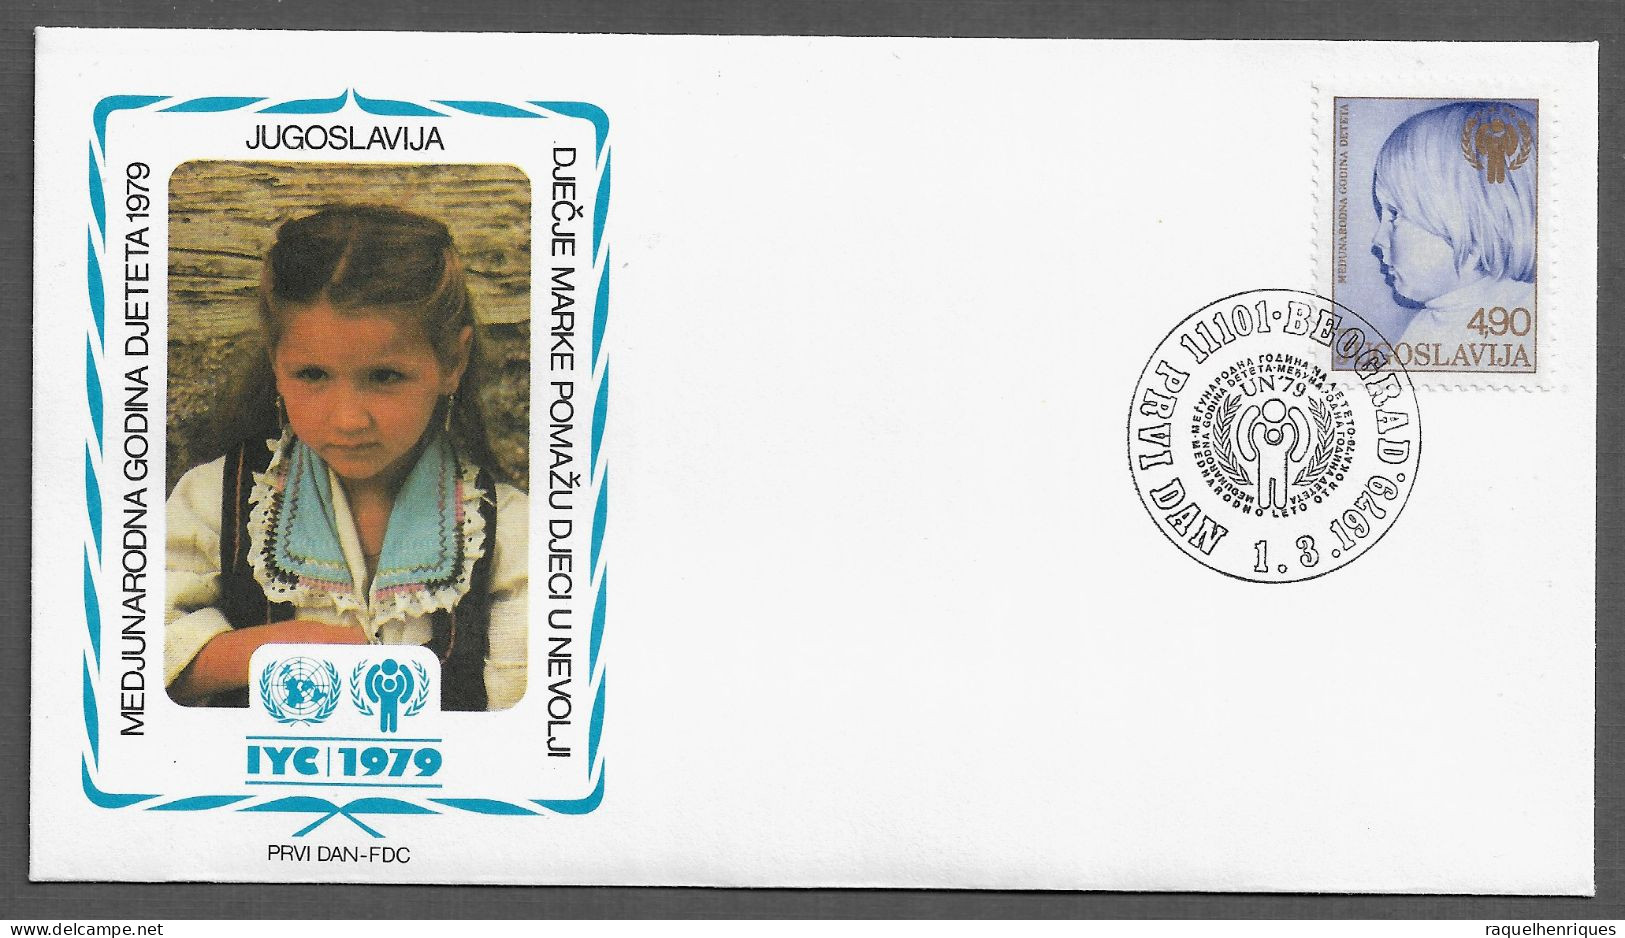 YUGOSLAVIA FDC COVER - 1979 International Year Of The Child SET FDC (FDC79#08) - Covers & Documents